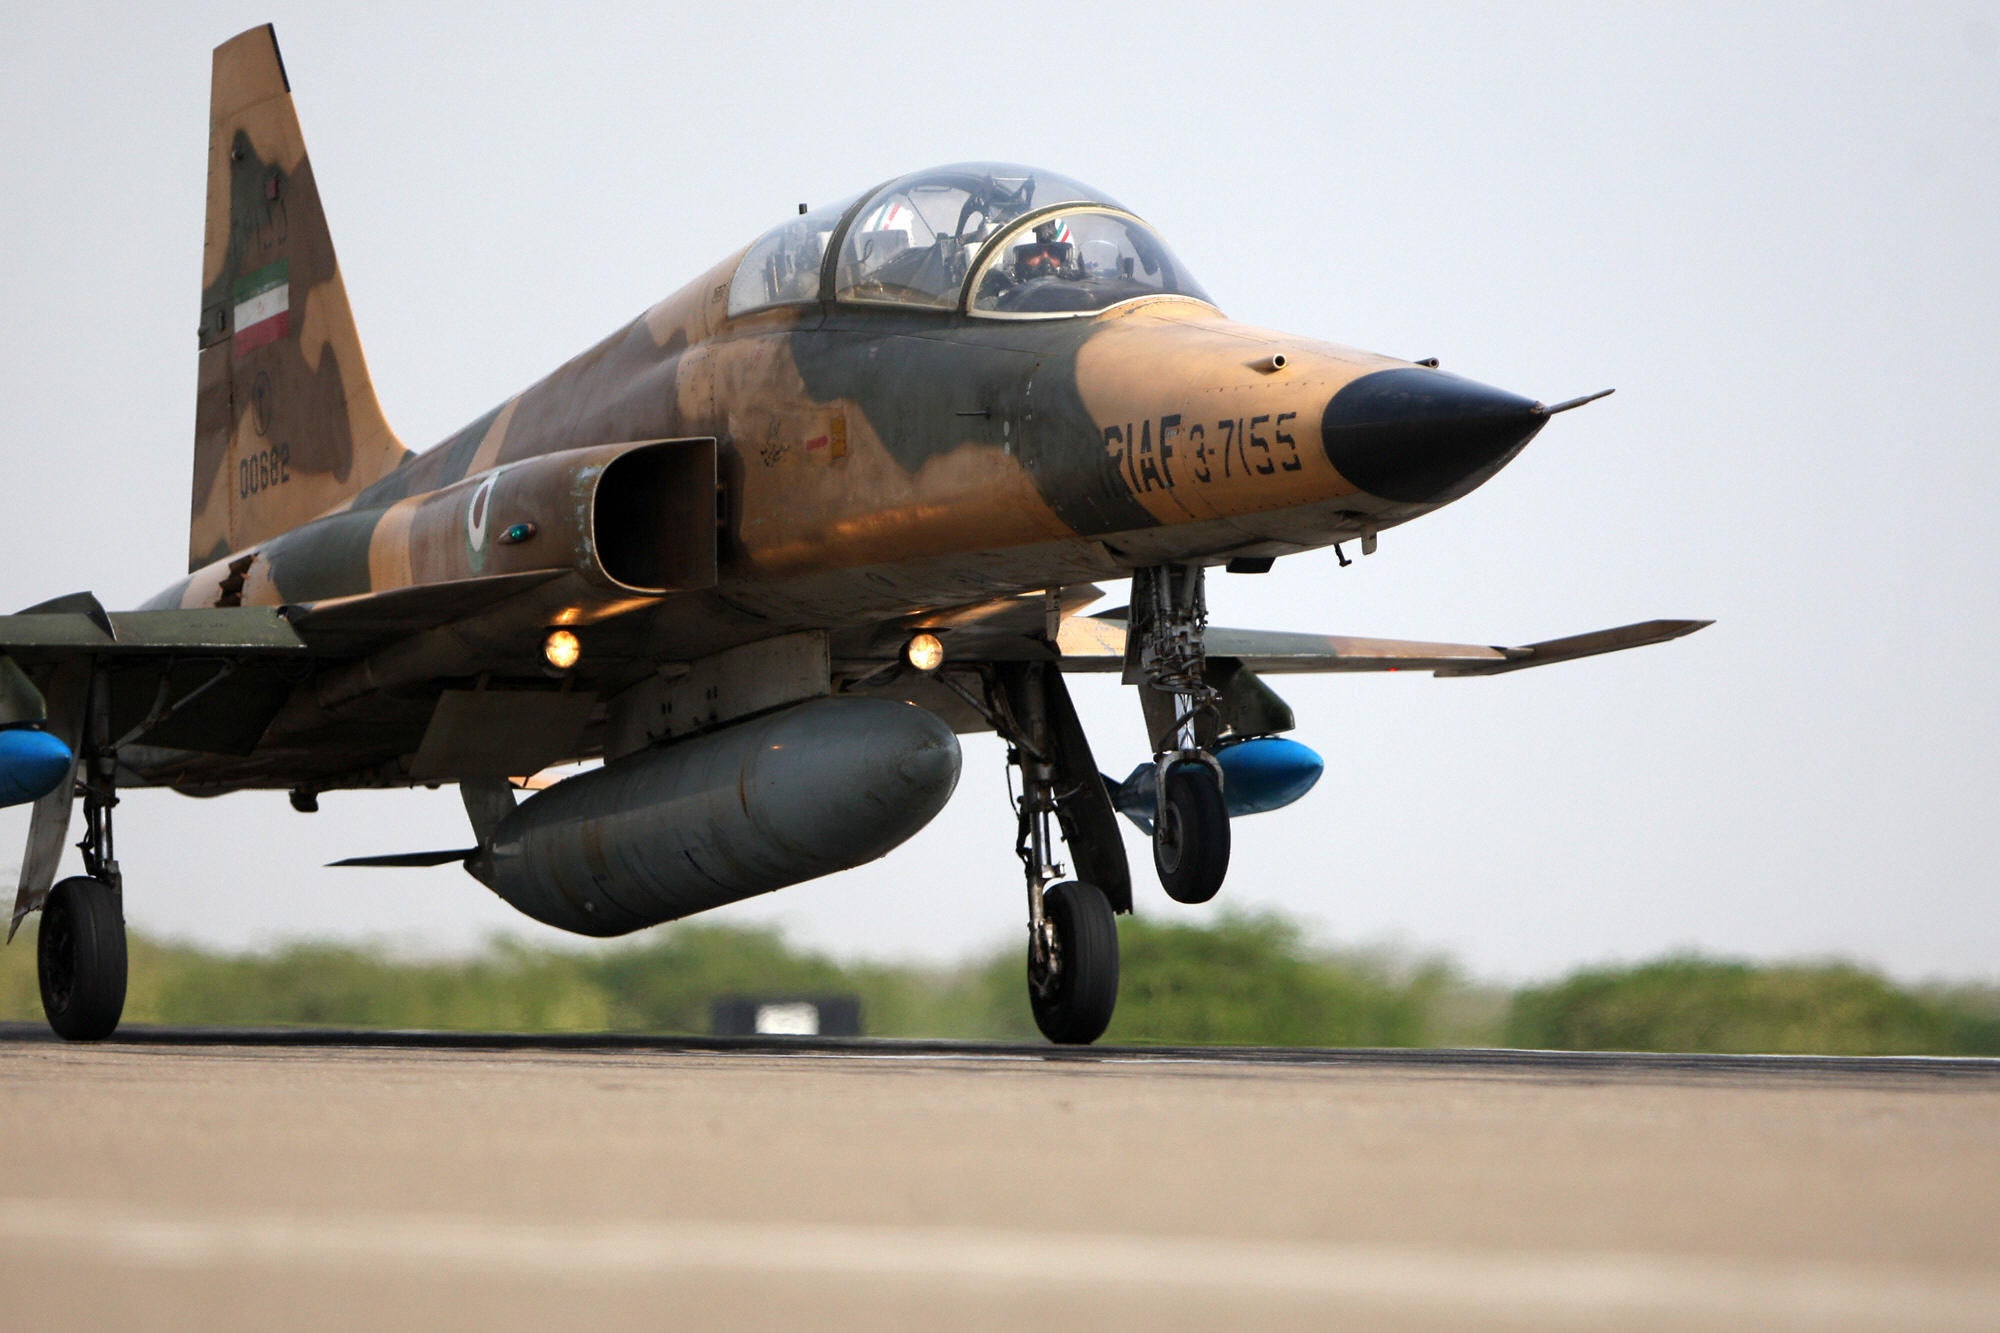 File: An Iranian F-5 fighter jet lands in Chabahar city, south of Iran during a military exercise on 23 June 2009